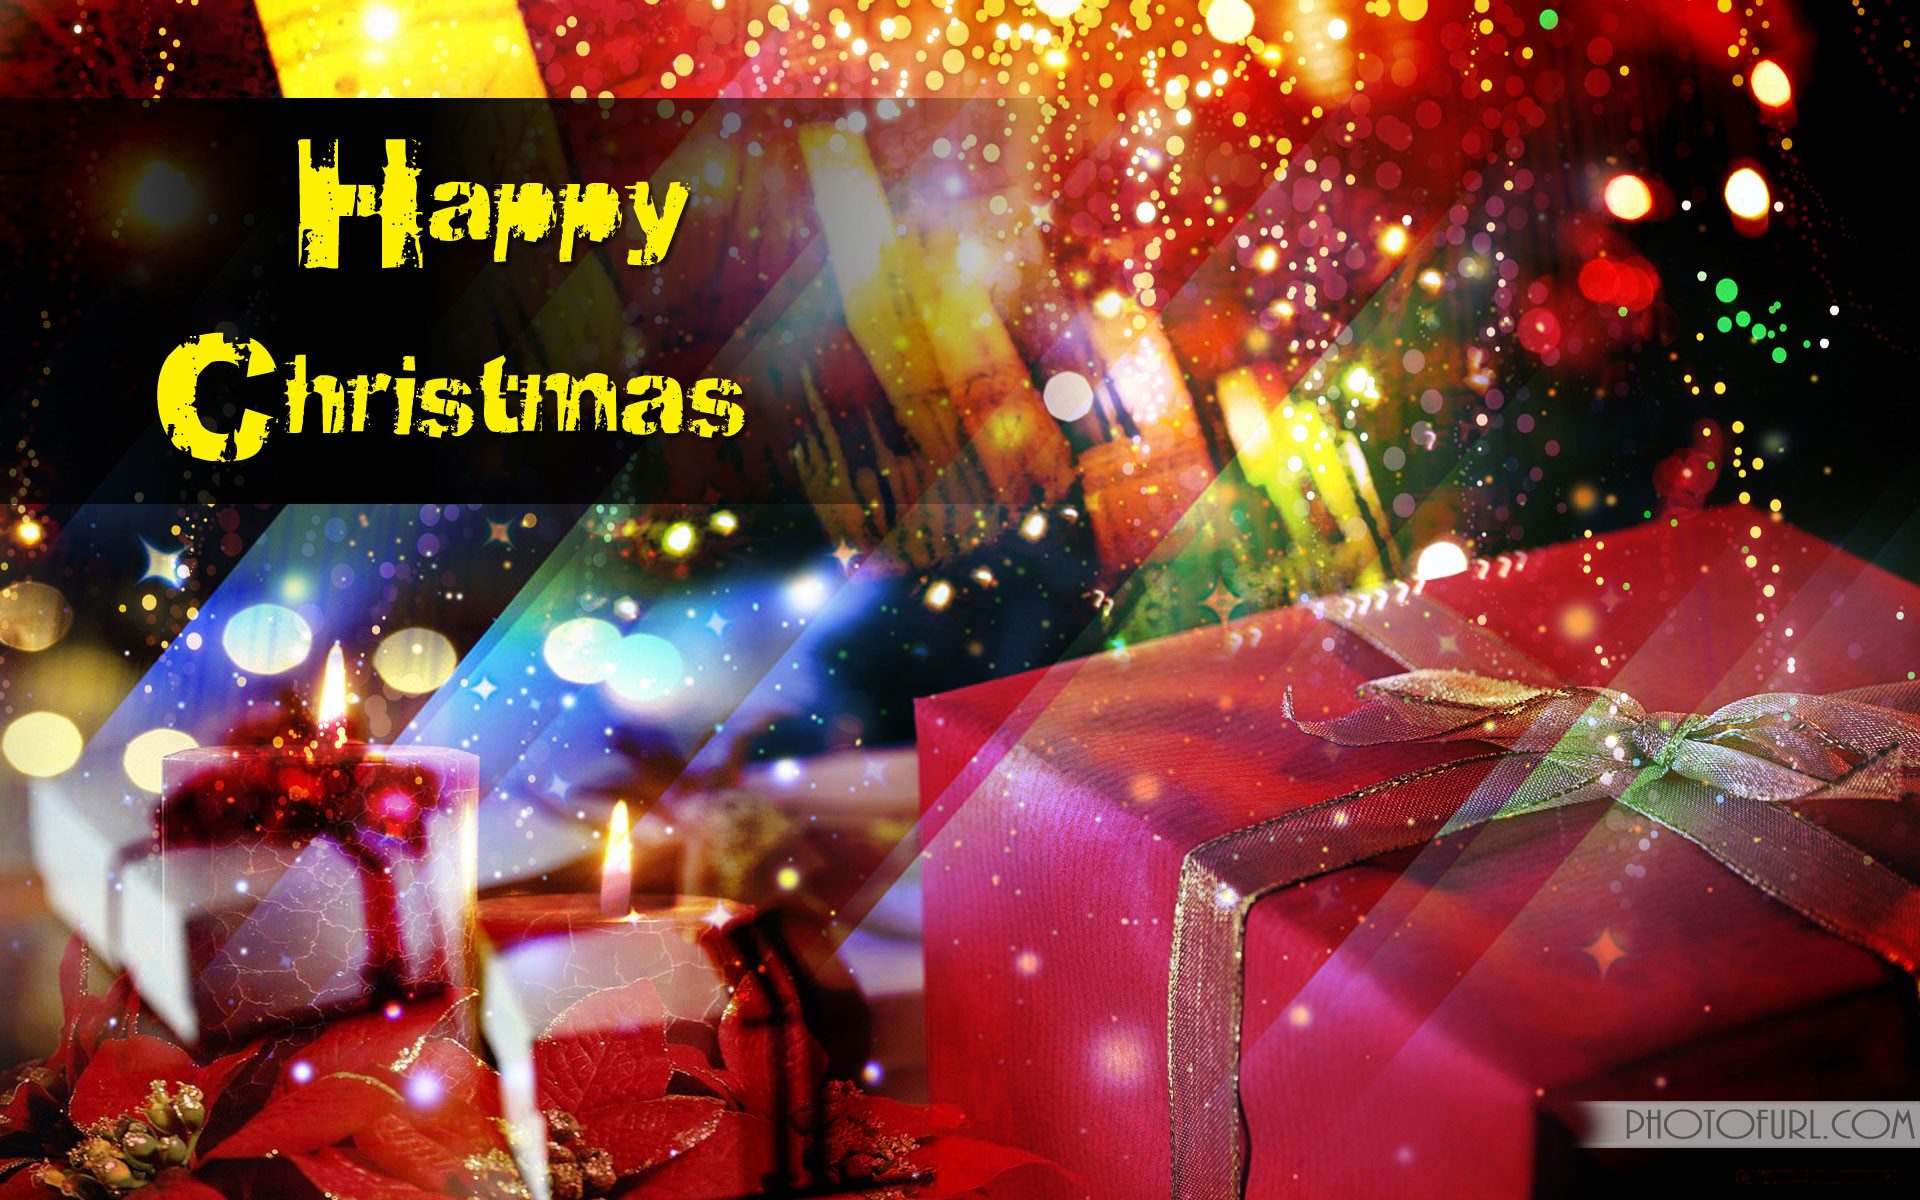 Happy Christmas Wallpaper For Desktop Background And Laptop Or Computer  Pictures